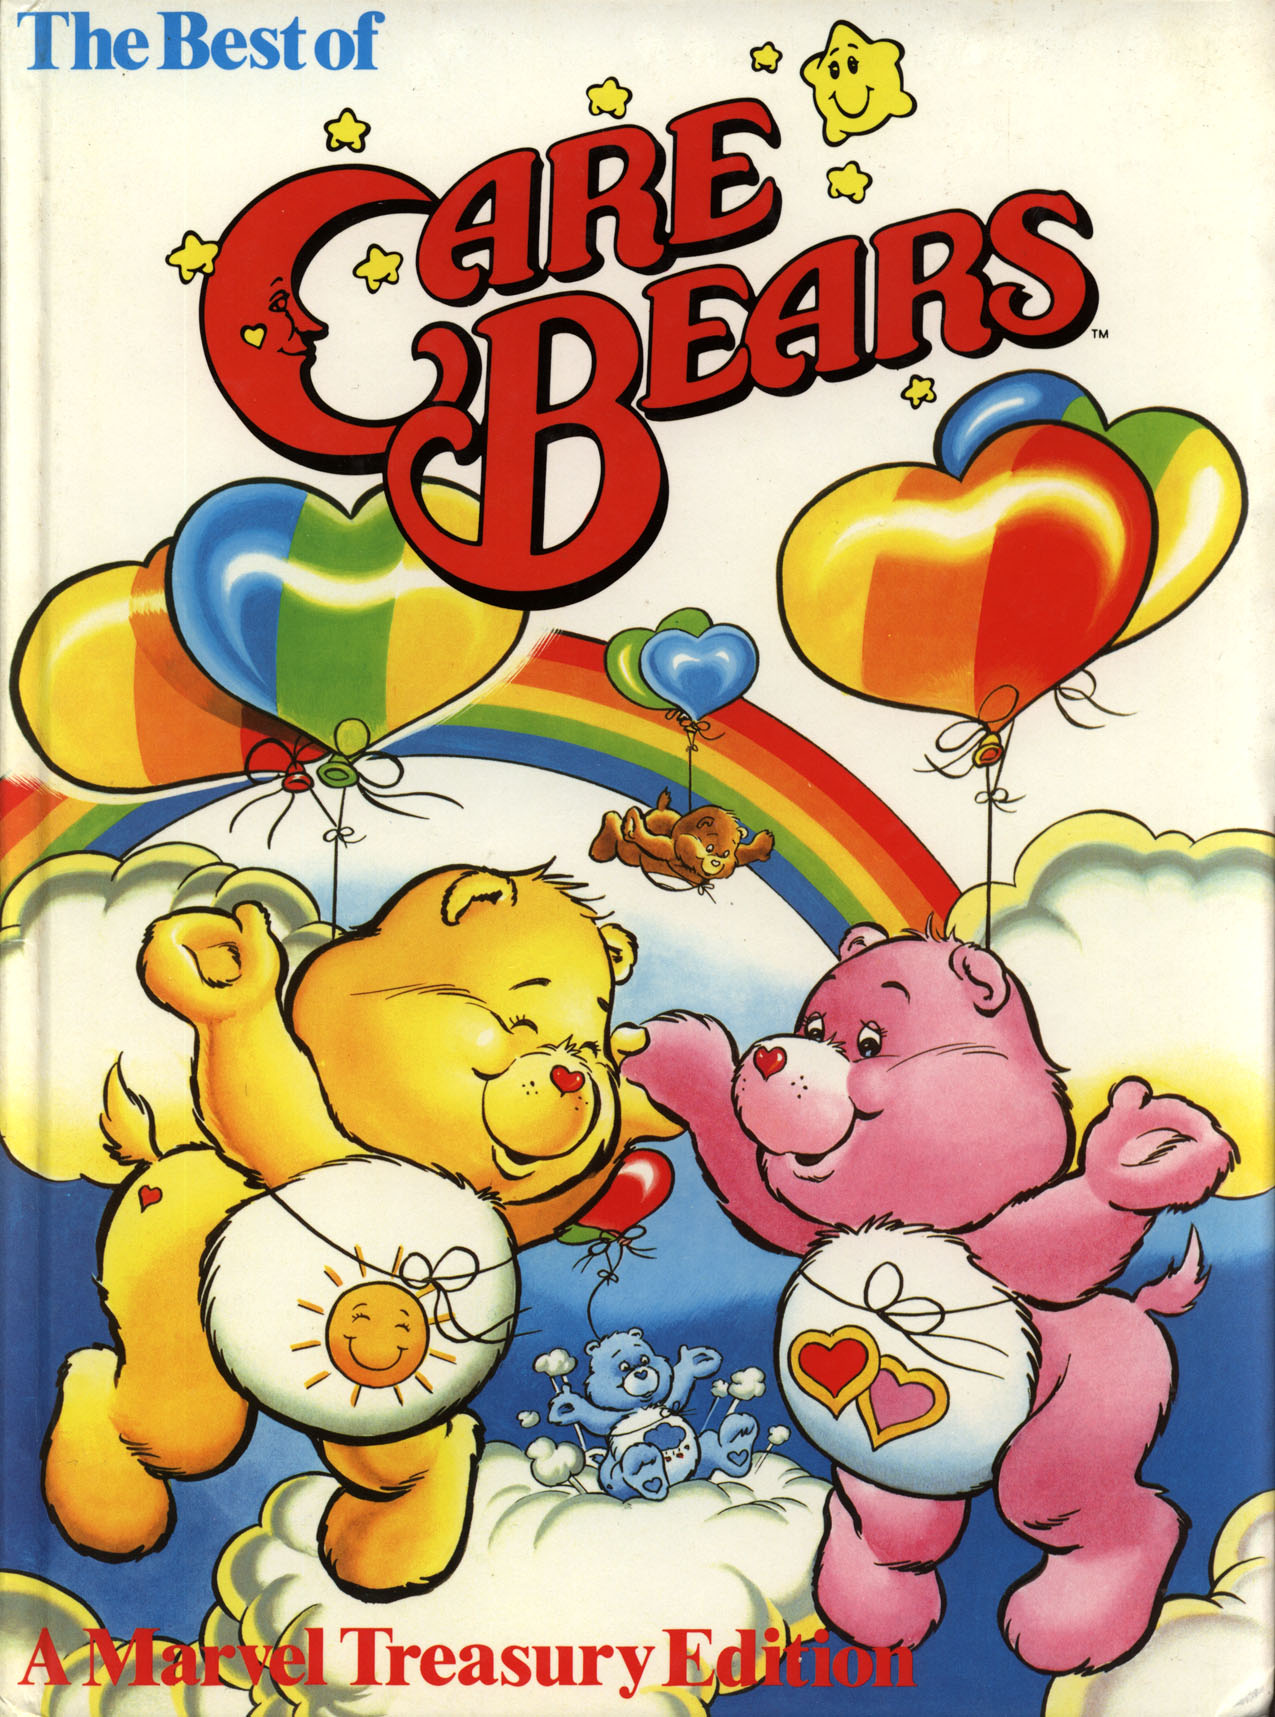 Read online The Best of Care Bears comic -  Issue # Full - 1